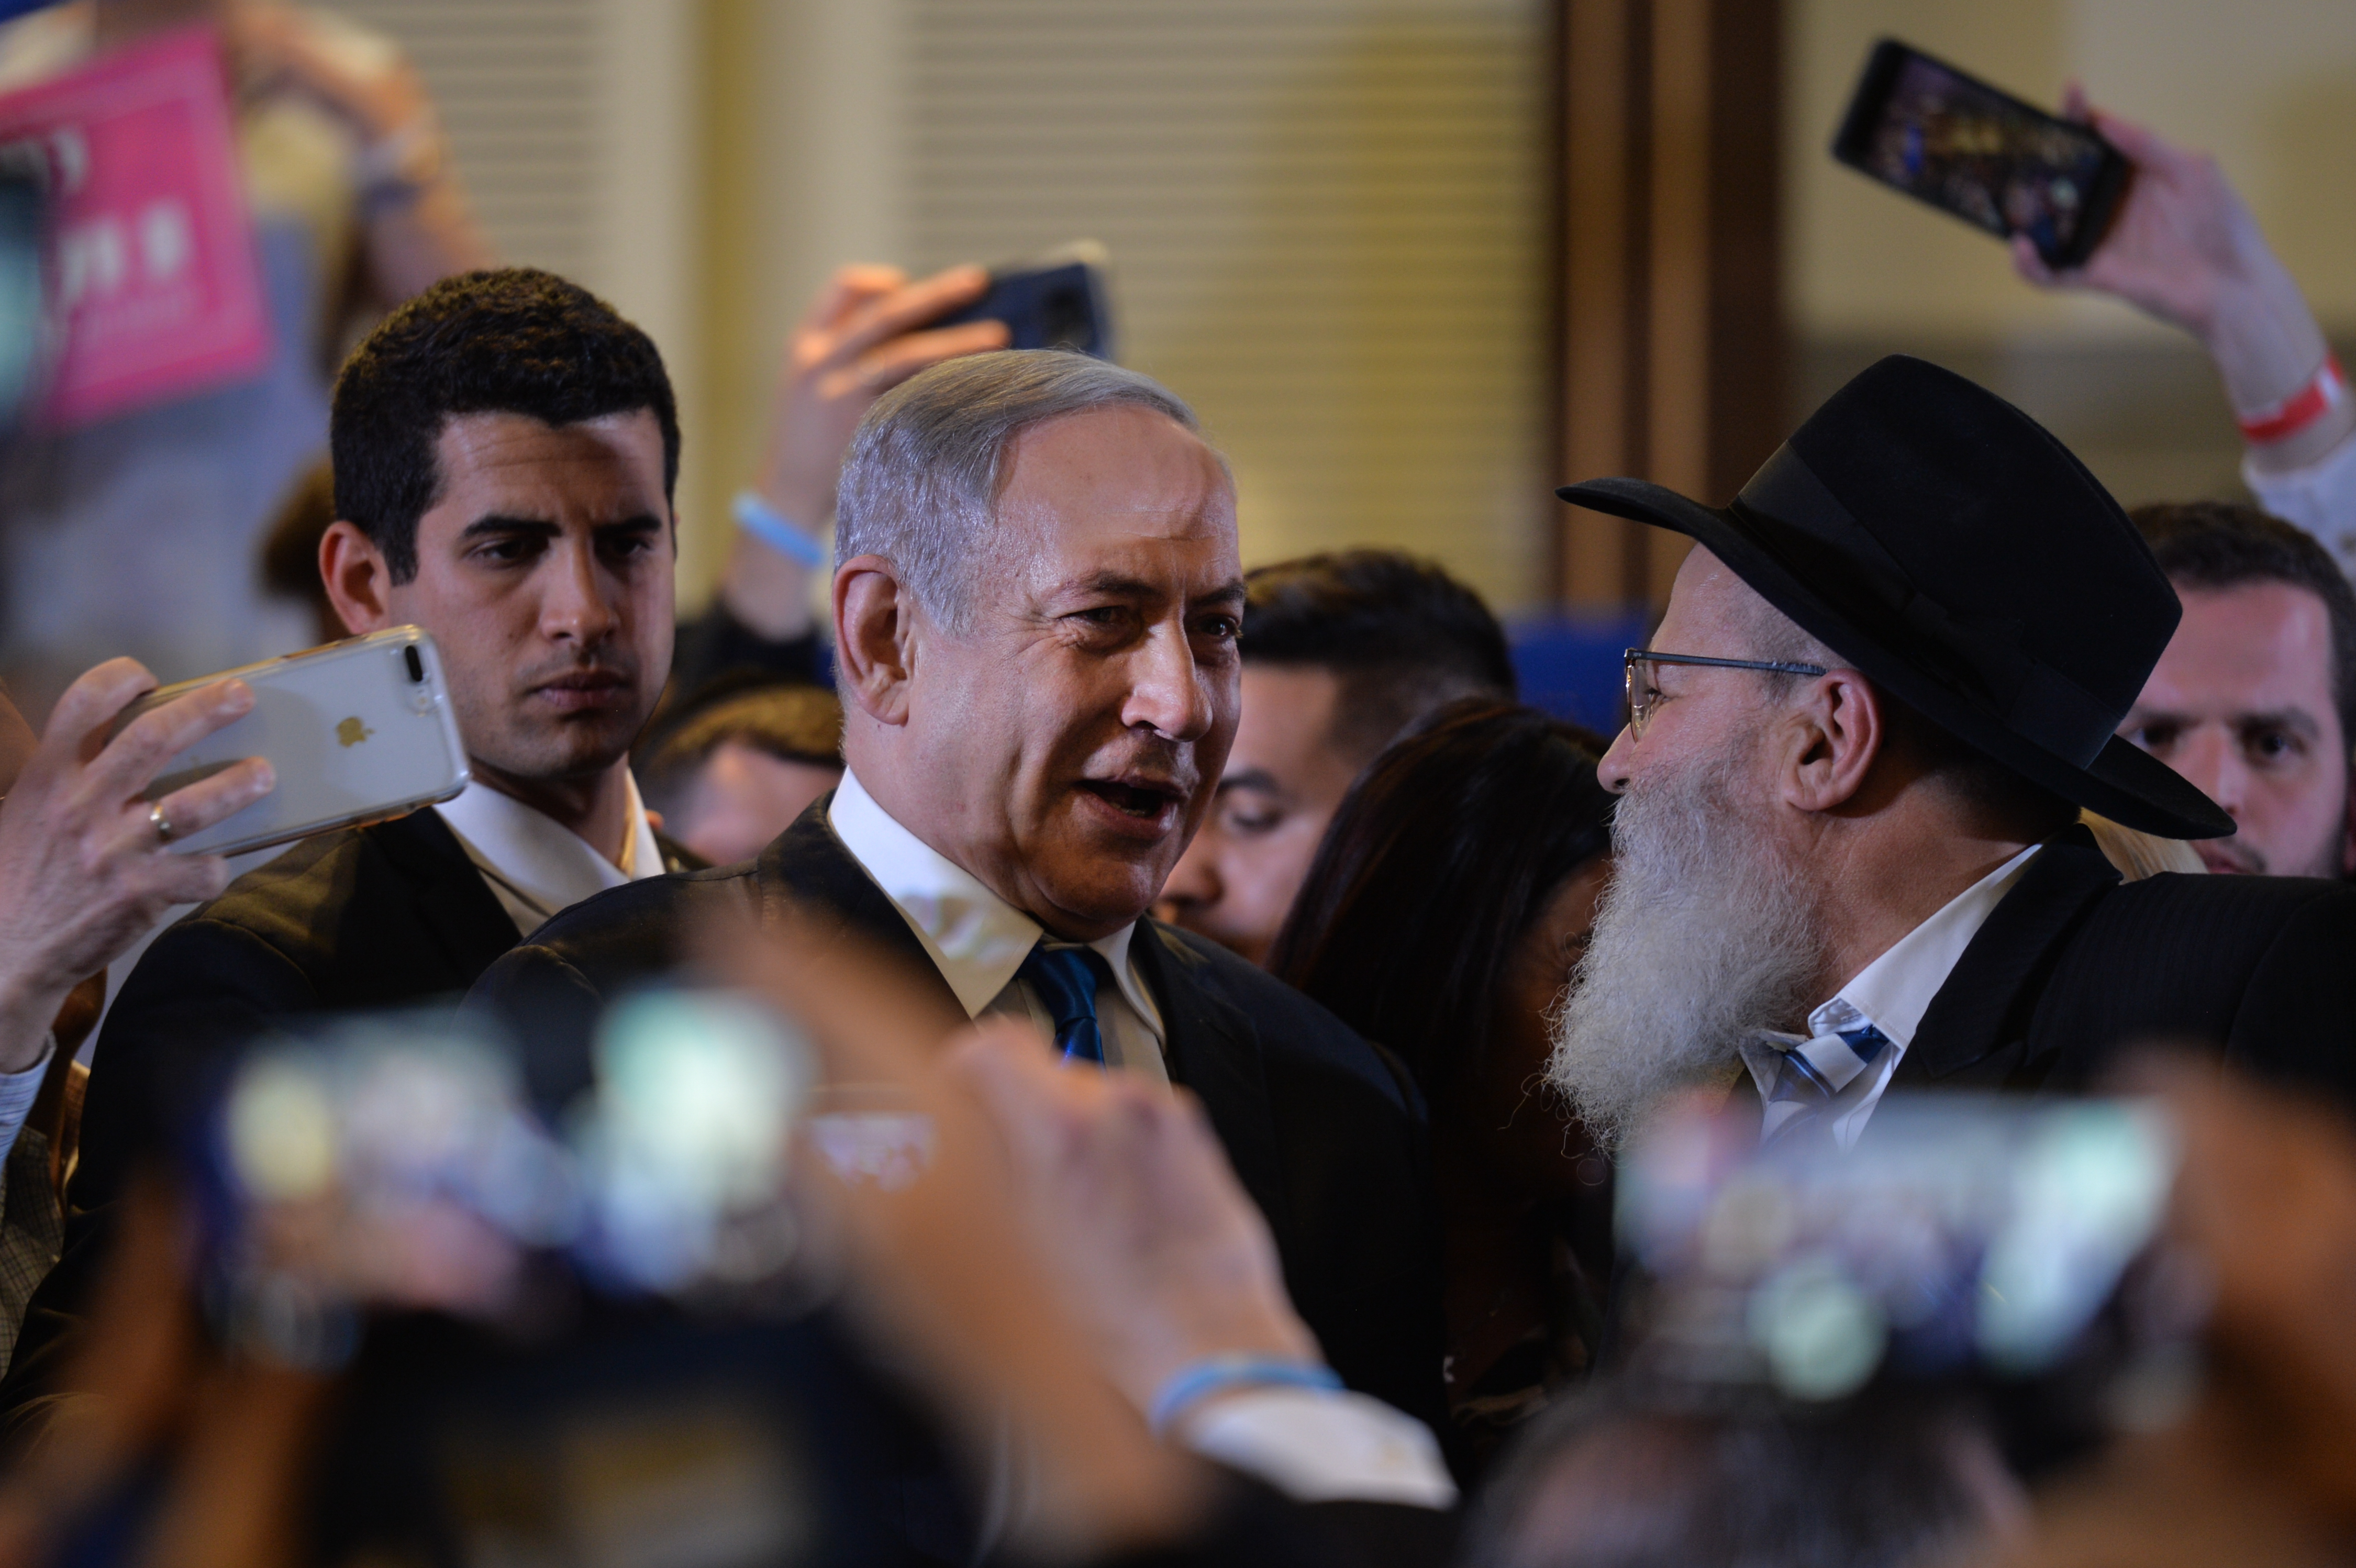 Israeli Prime Minister Benjamin Netanyahu meet his supporters during a Likud party upcoming election campaign rally in Jerusalem on Wednesday, February 26, 2020, in Jerusalem, Israel. (Artur Widak—NurPhoto/Getty Images)